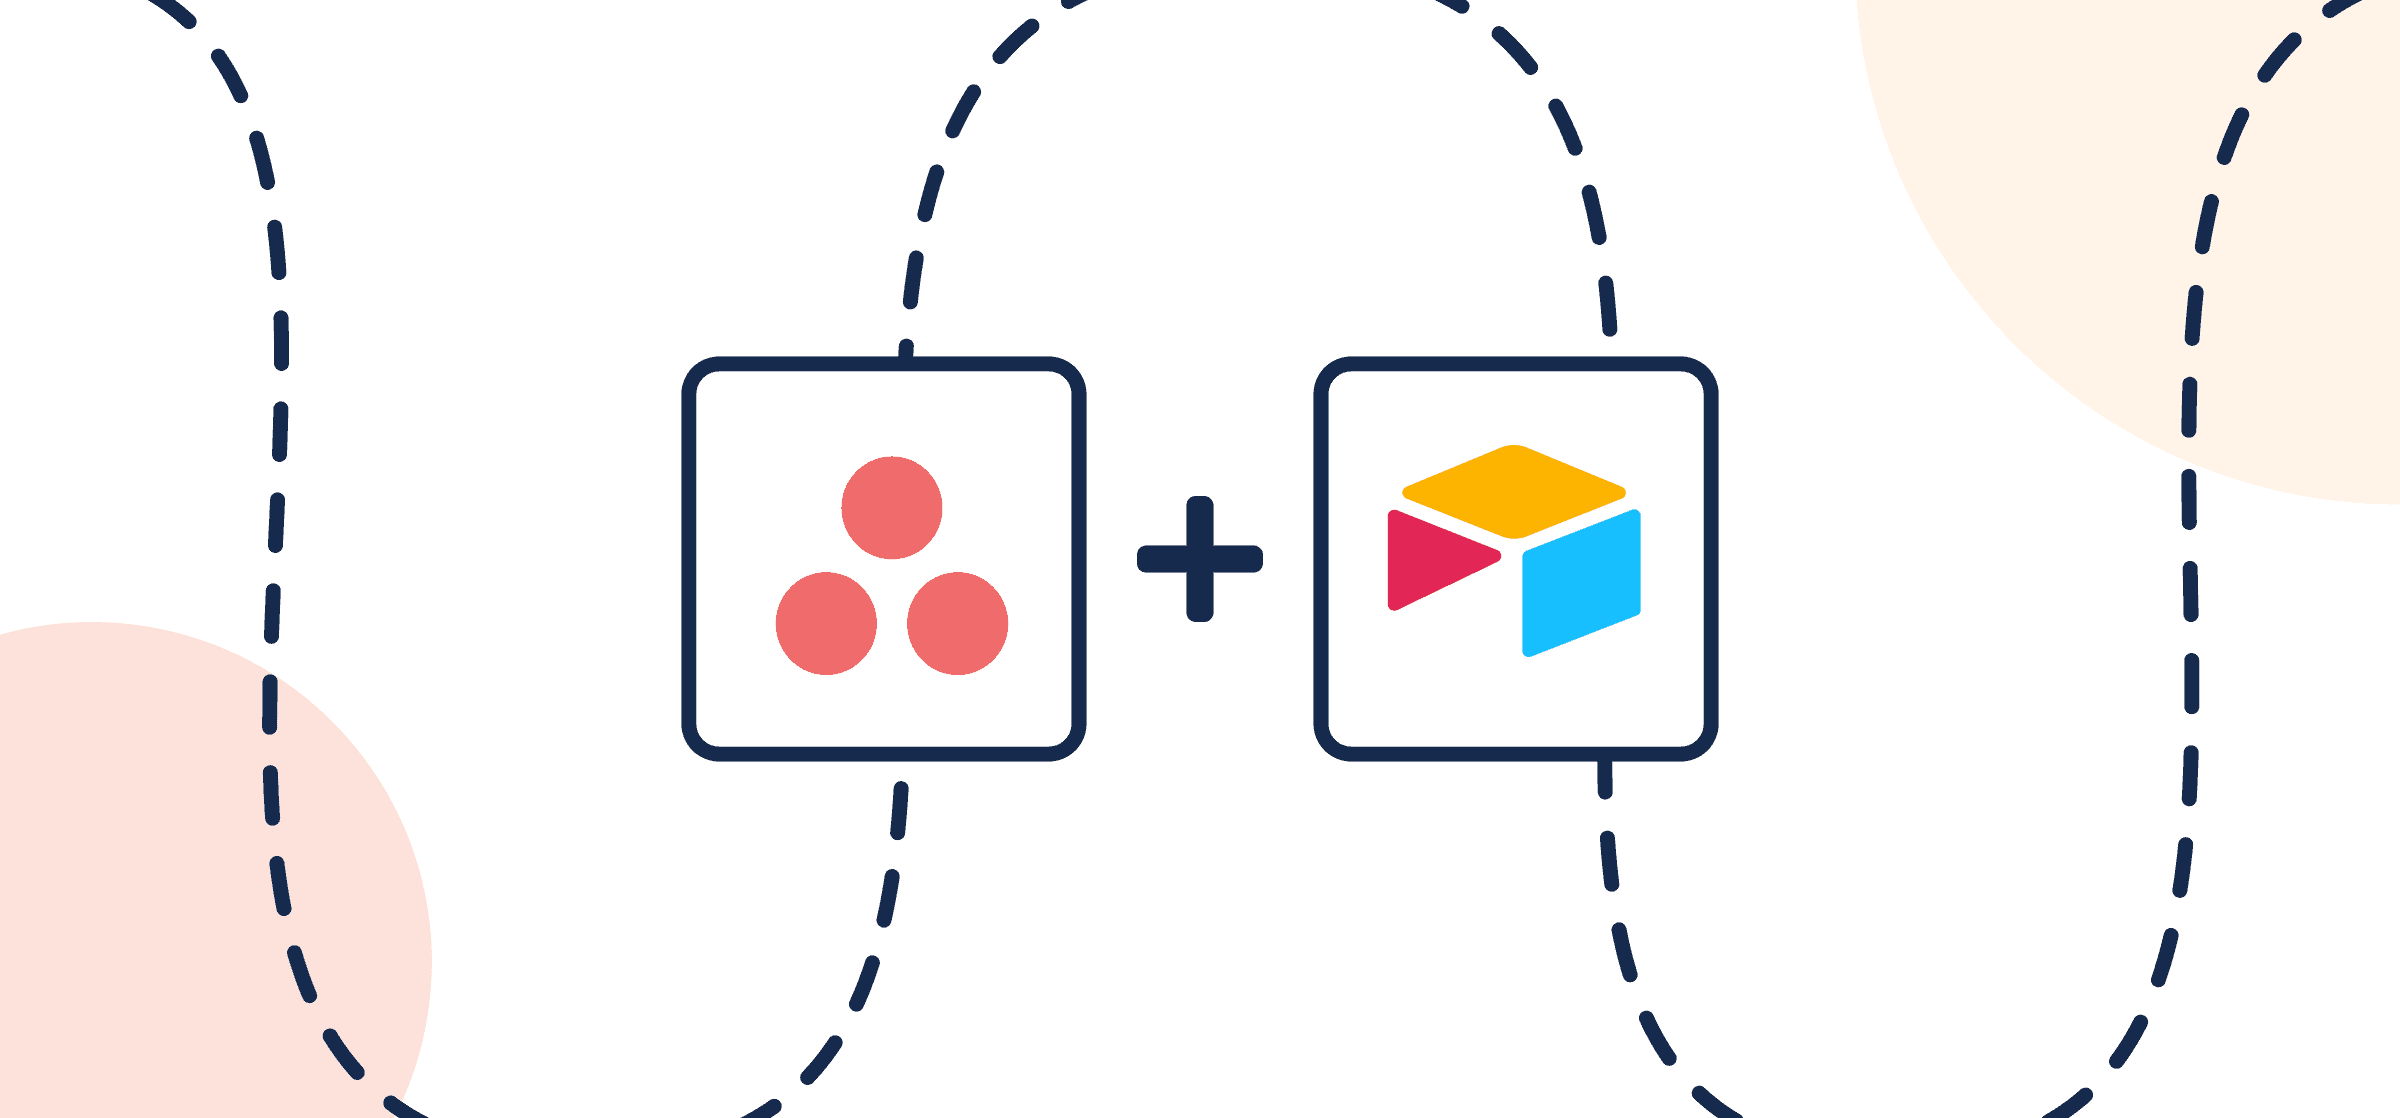 Featured image illustrating a step-by-step guide on syncing Asana to Airtable through Unito, depicted by the connected logos through circles and dotted lines.